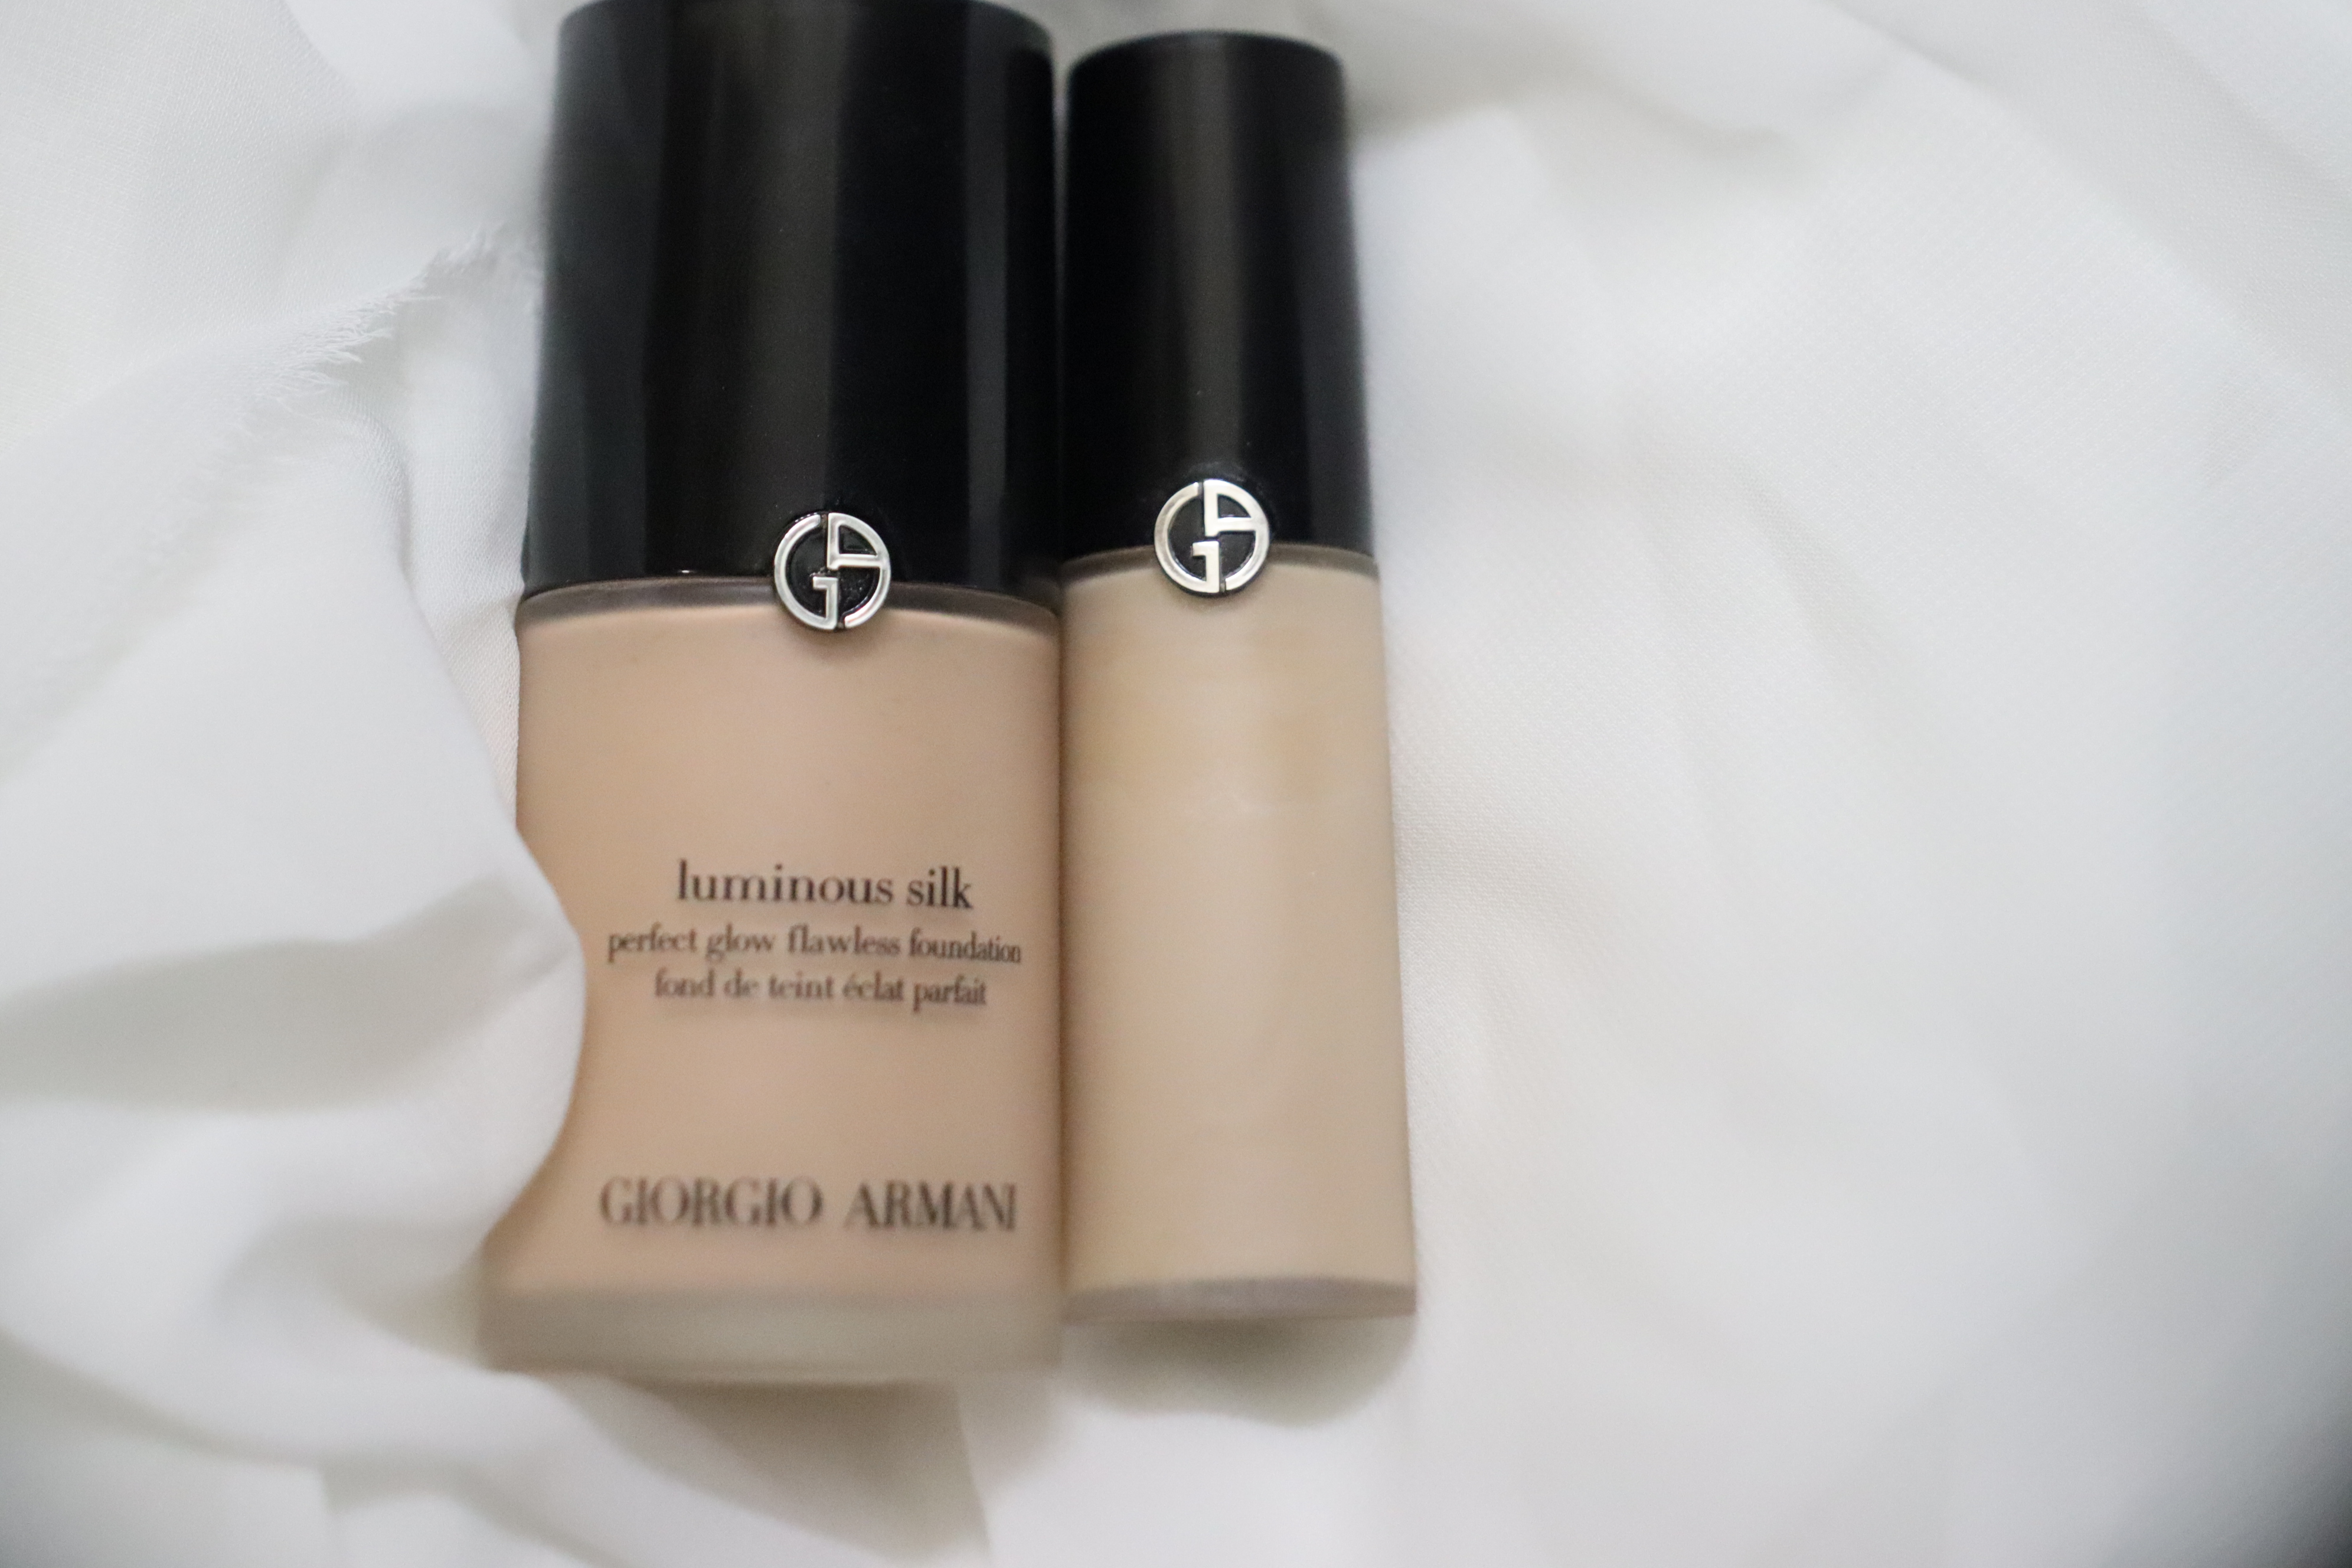 Giorgio Armani Luminous Silk foundation Review | Is it worth the hype?